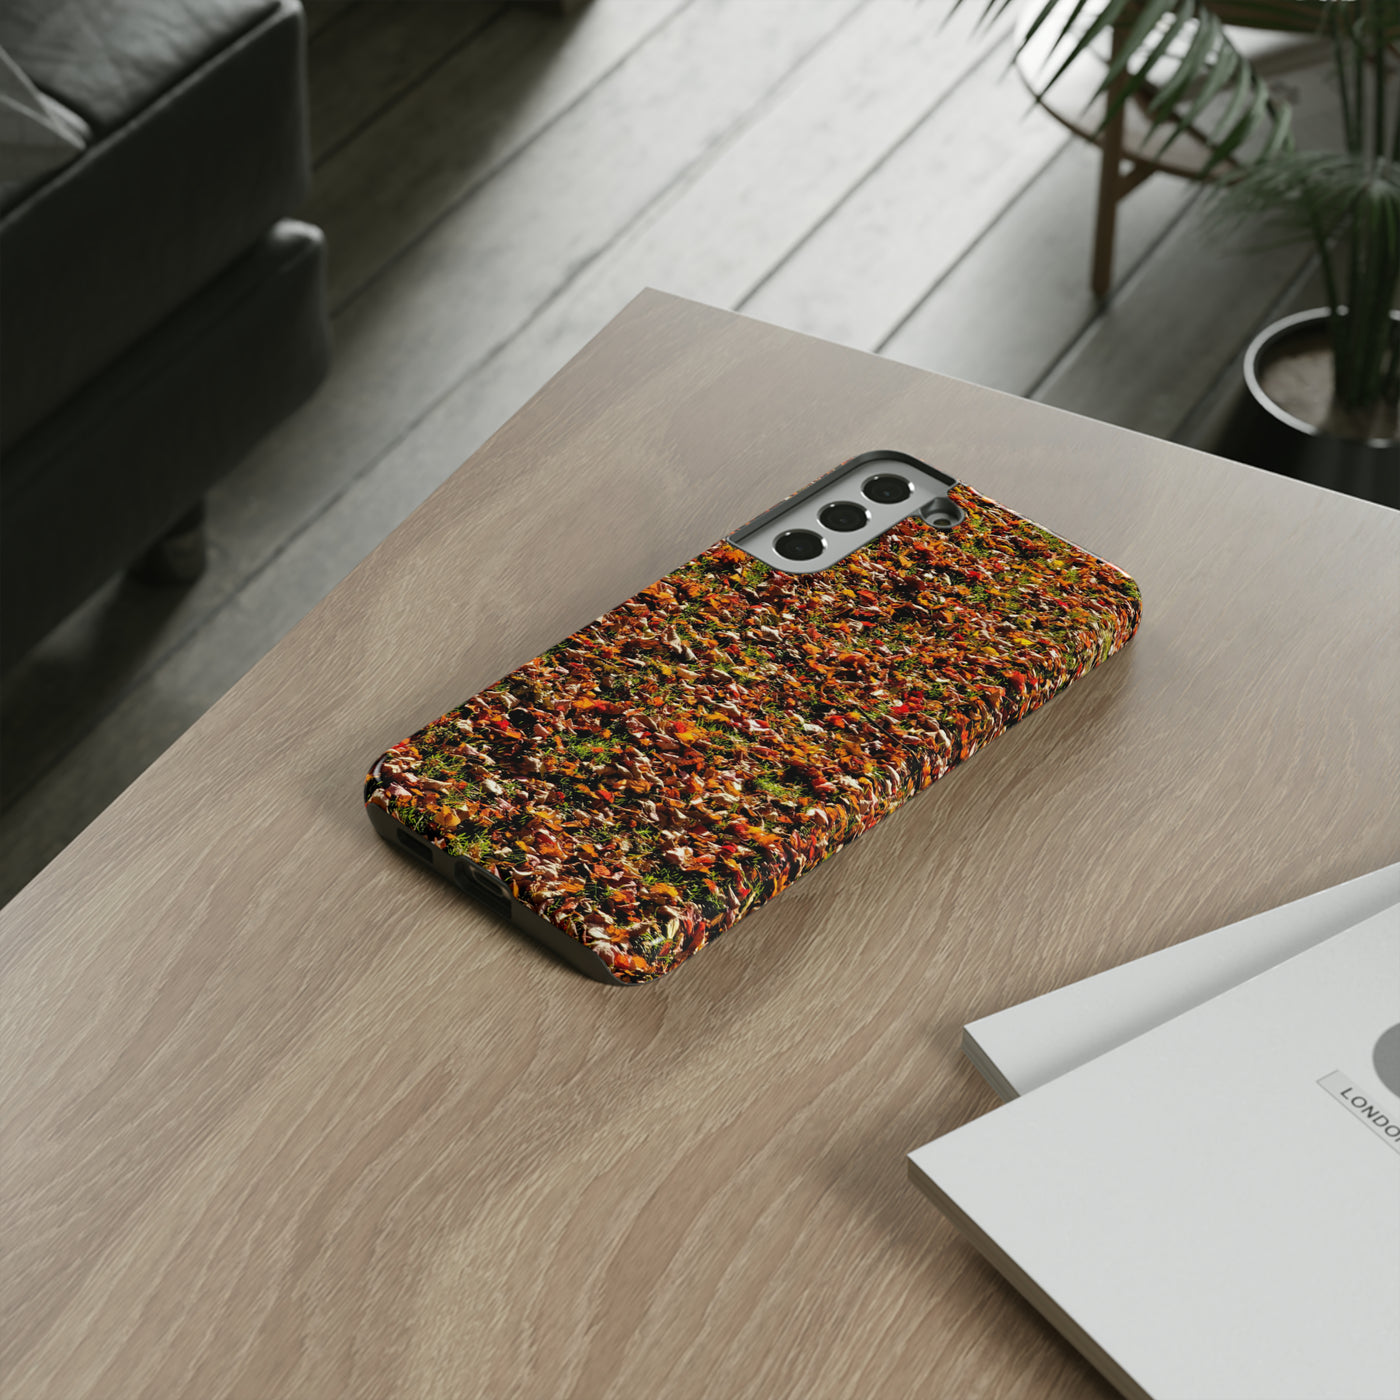 Cool Samsung Phone Case | Aesthetic Samsung Phone Case | Fall Leaves | Galaxy S23, S22, S21, S20 | Luxury Double Layer | Cute - Studio40ParkLane